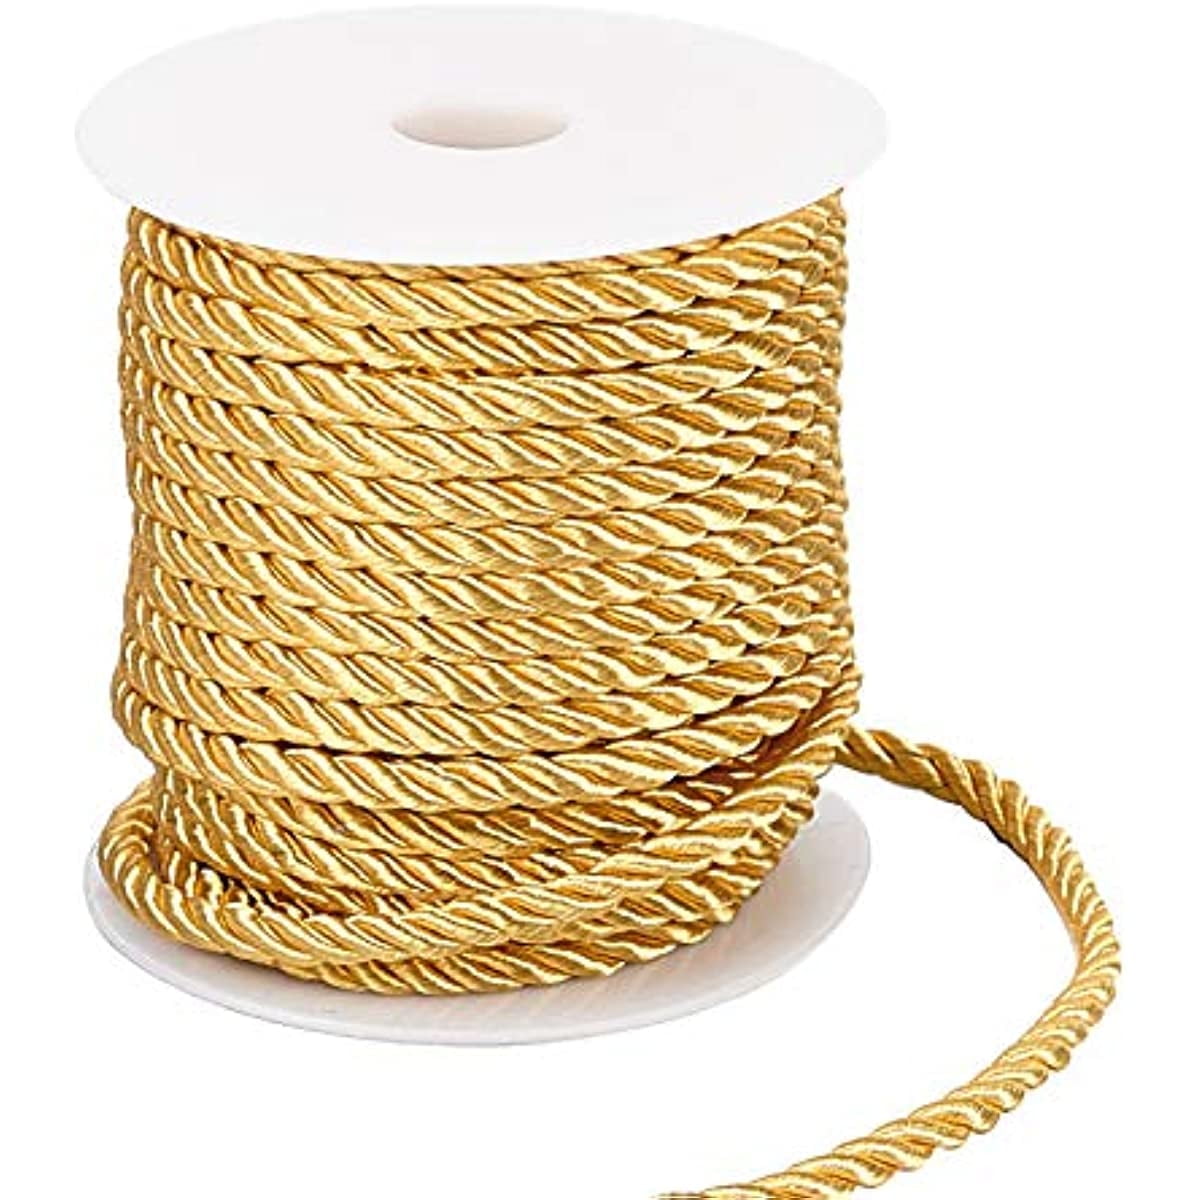 5mm Twisted Cord Trim 3-Ply Polyester Cord Shiny Viscose Cording